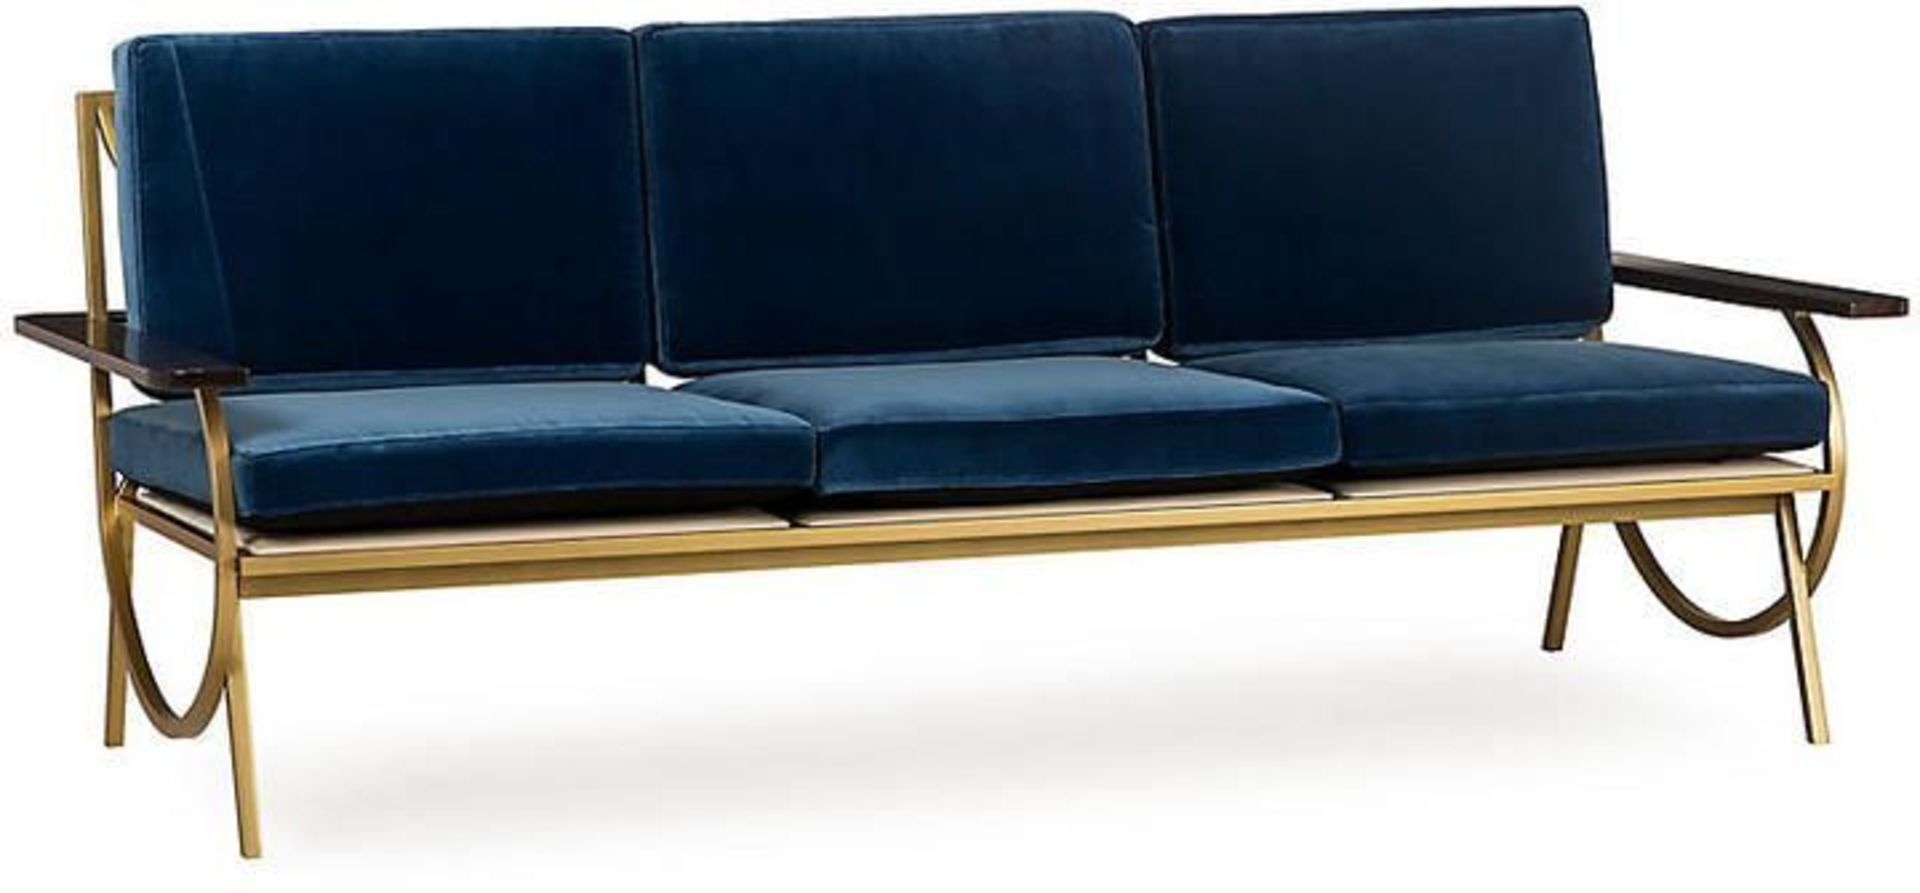 B Sofa Vana Blue Velvet A Contemporary Take On A Classic Form; Featuring An Antique Brass Frame, - Image 2 of 2